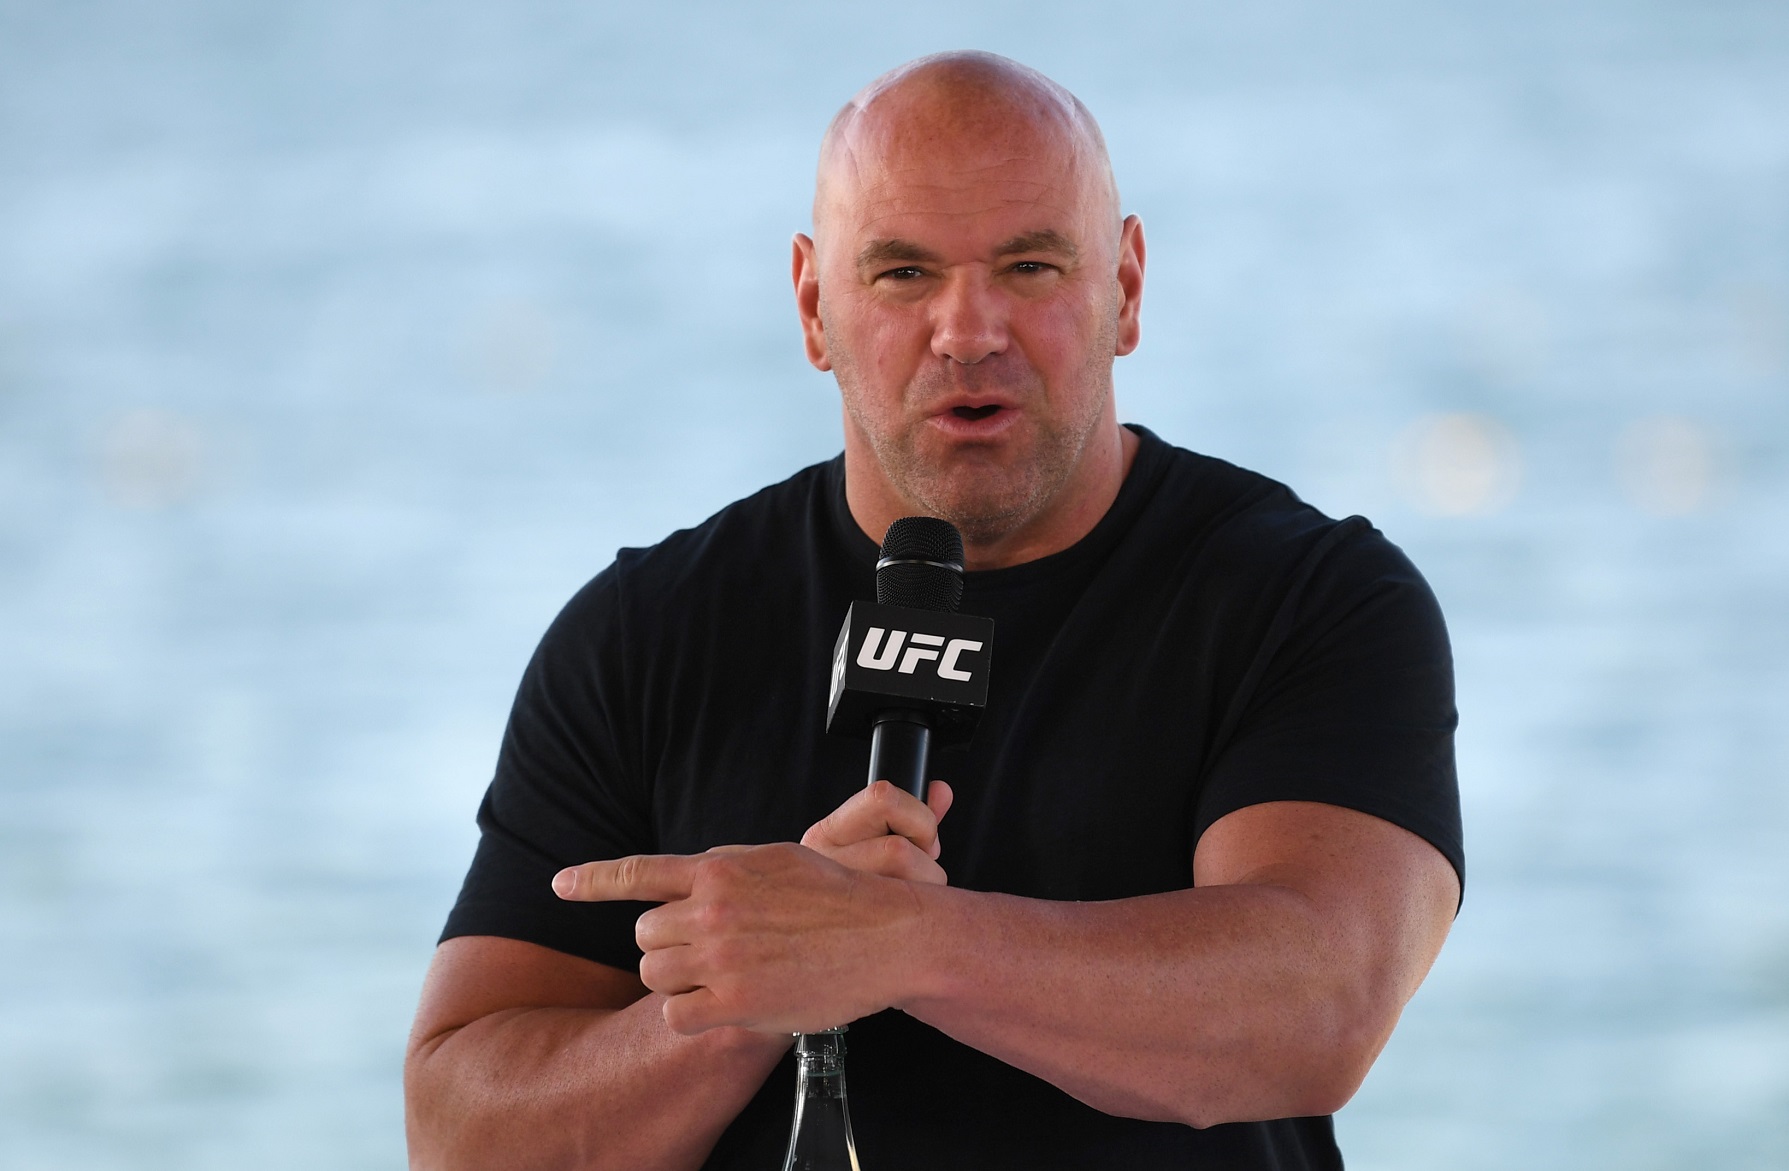 Dana White Didn't Invest a Nickel of His Own While Building the $4 Billion UFC Empire